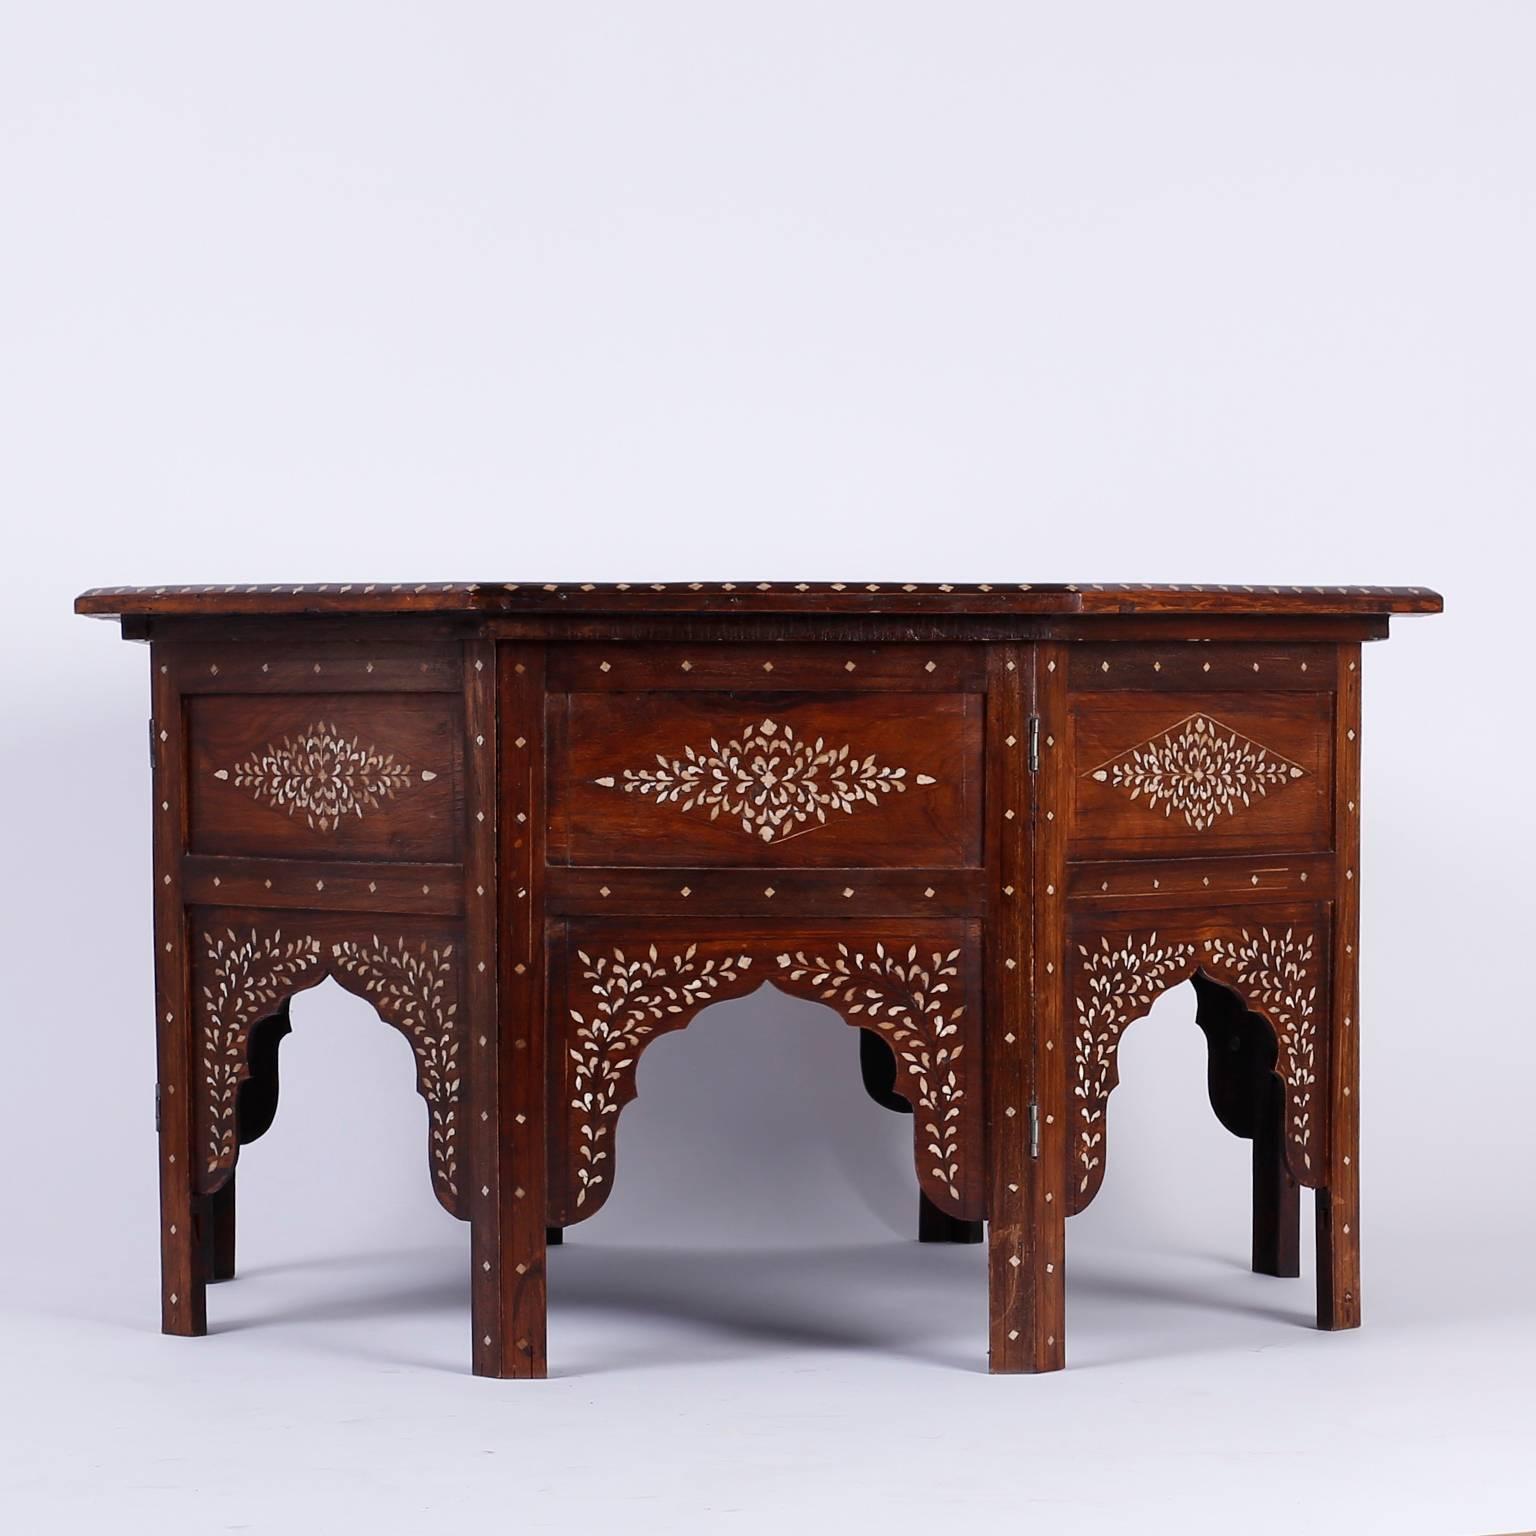 Syrian octagon coffee or cocktail table very well crafted with rosewood and ebony and decorated with bone inlays. The top is a floral rosewood and bone mosaic and the eight panel base has floral inlays and architectural arches. Works well in Anglo